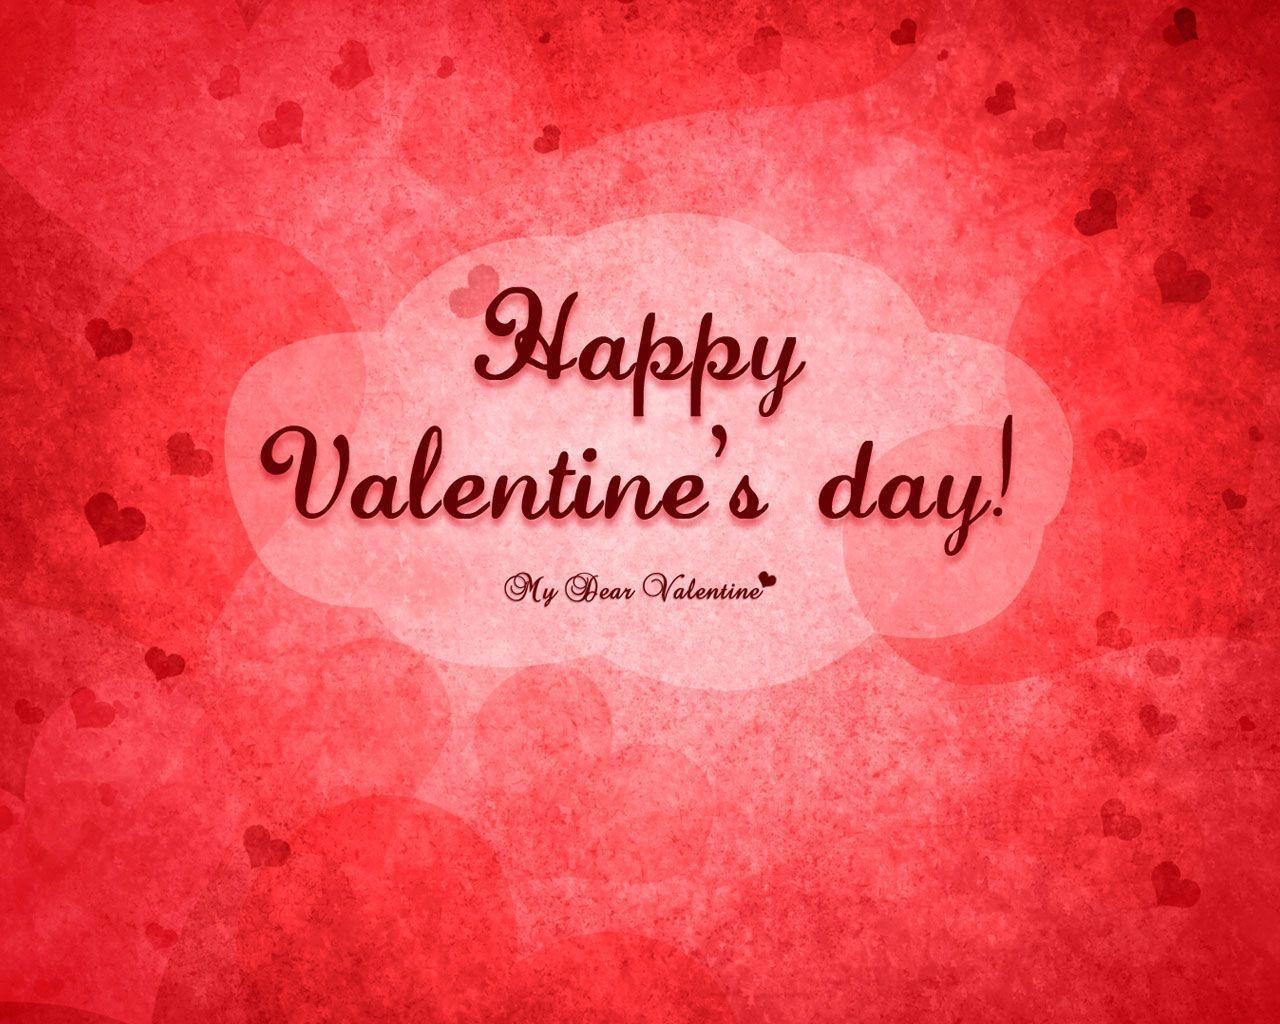 Valentine Day wallpaper image Picture Photo Pics For Facebook